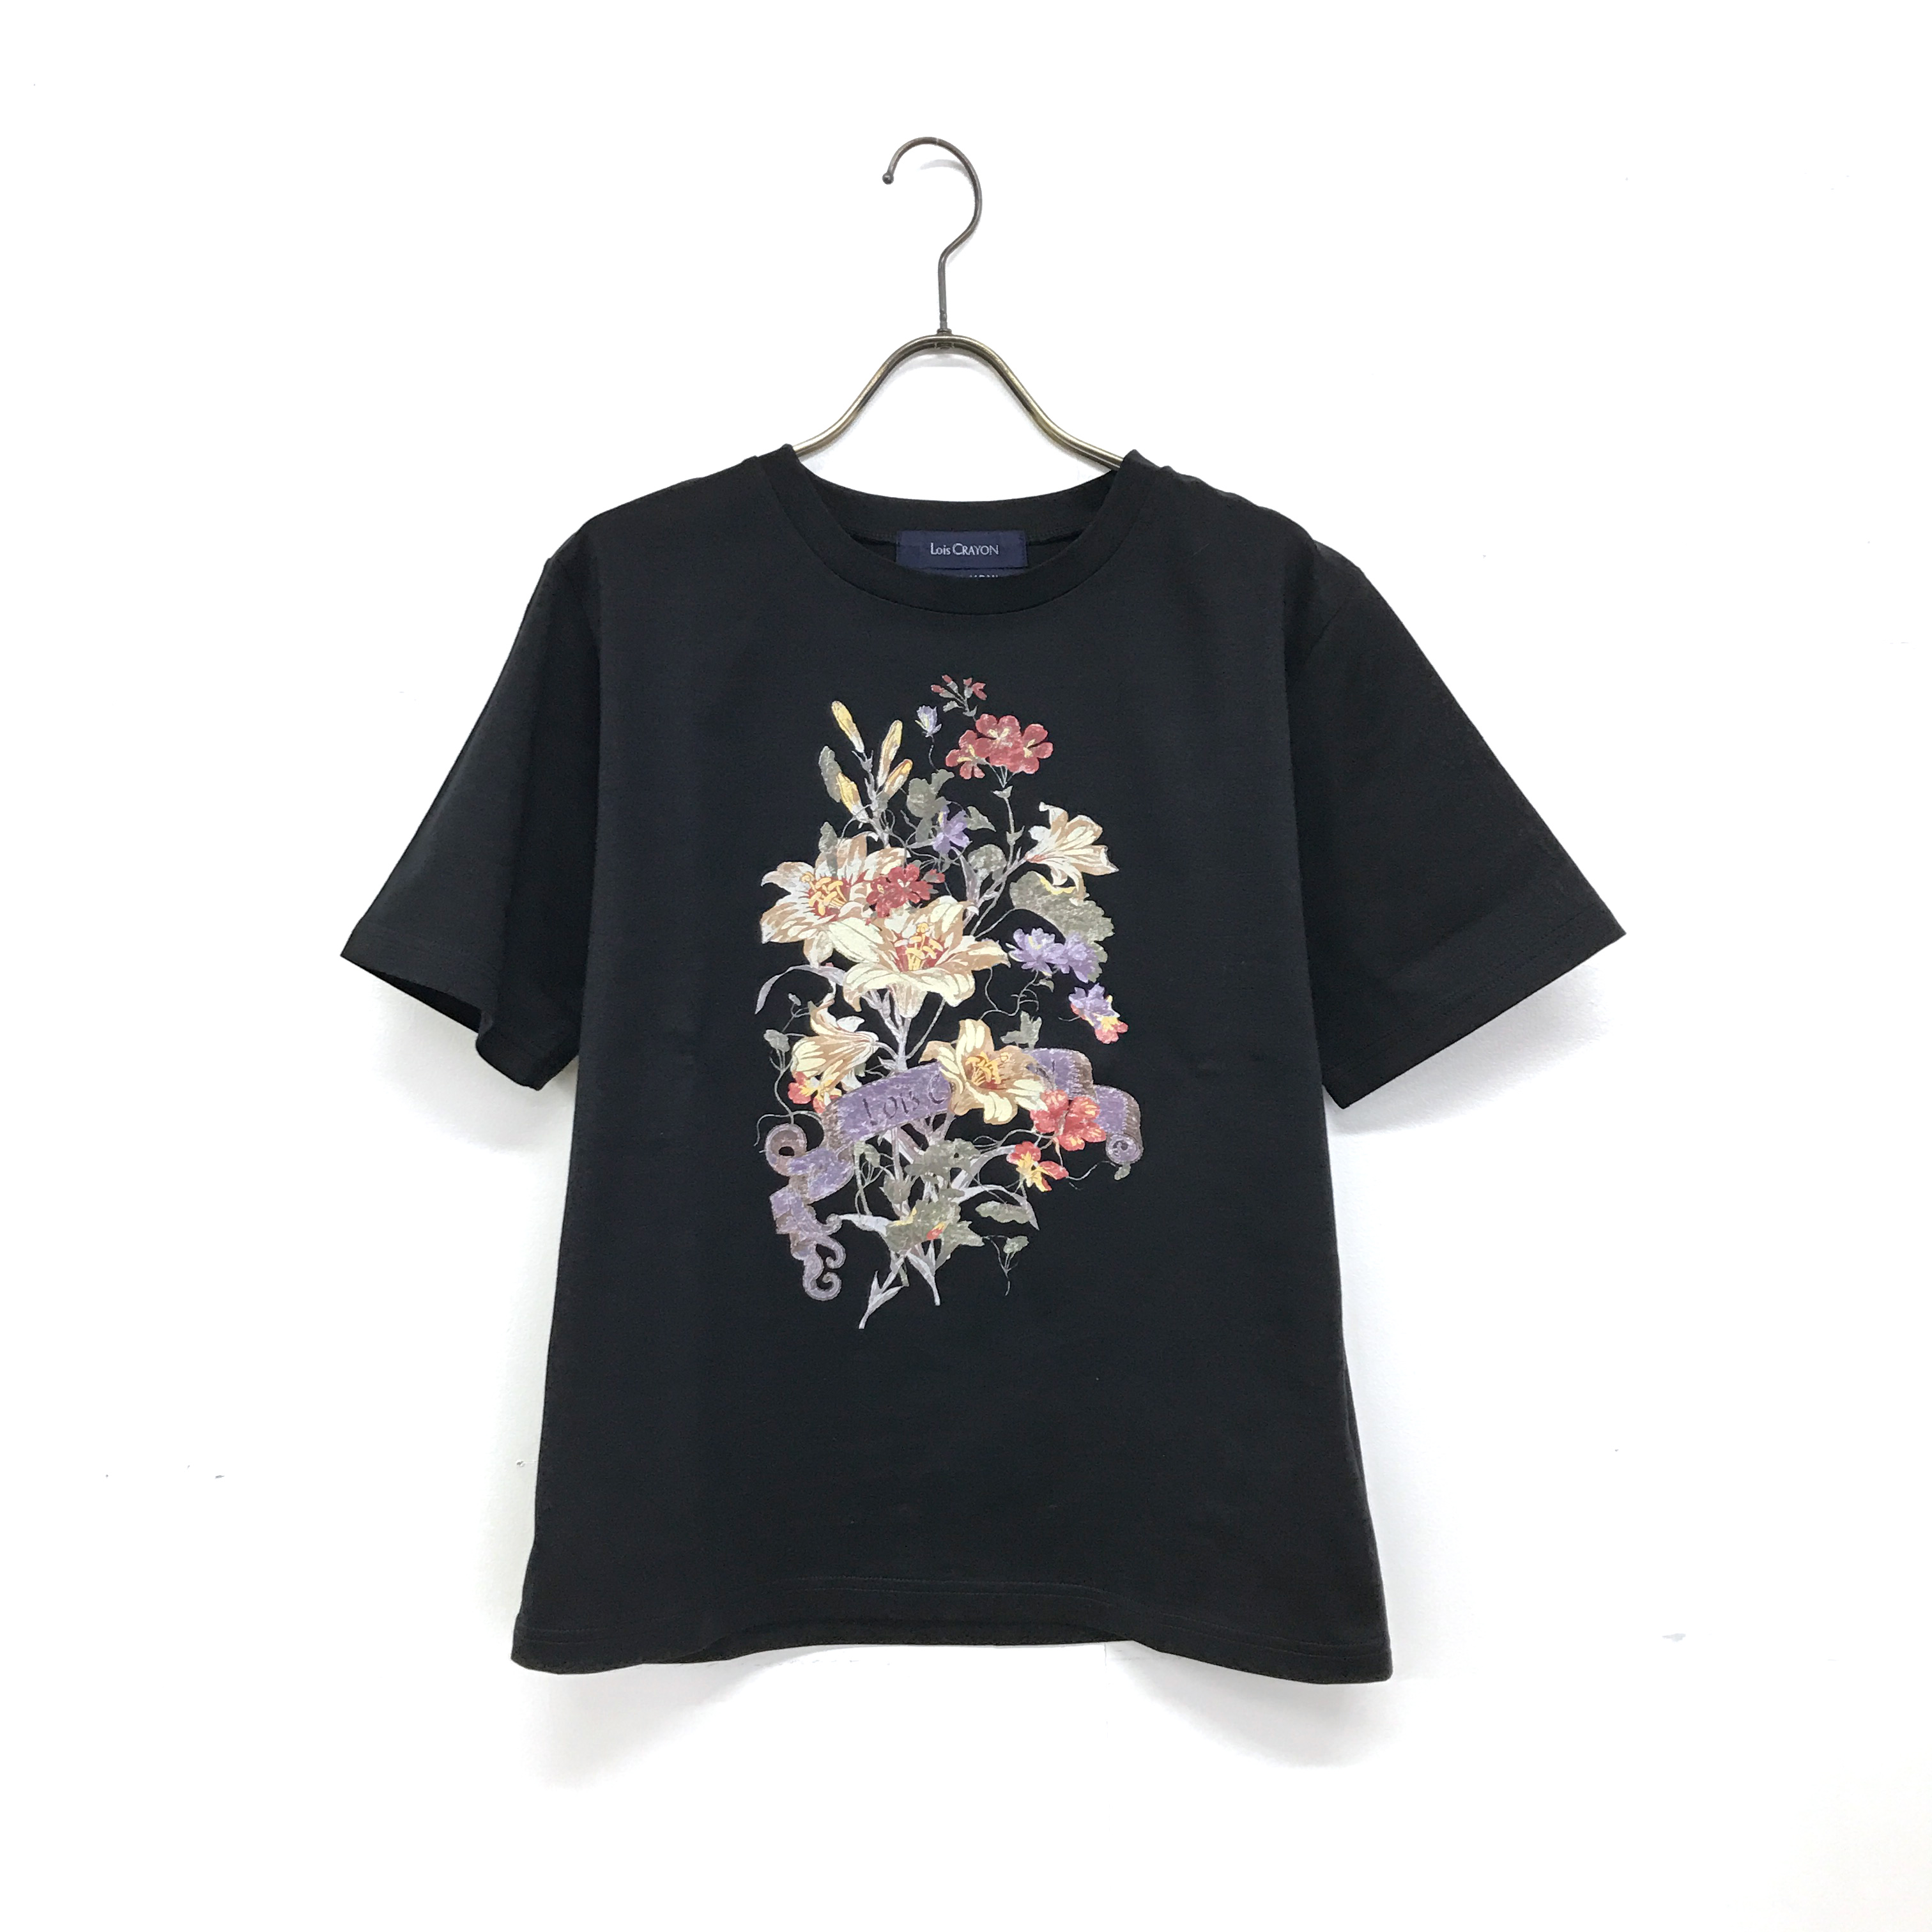 NEW ITEMS | ロイスクレヨン公式サイト | Lois CRAYON official website